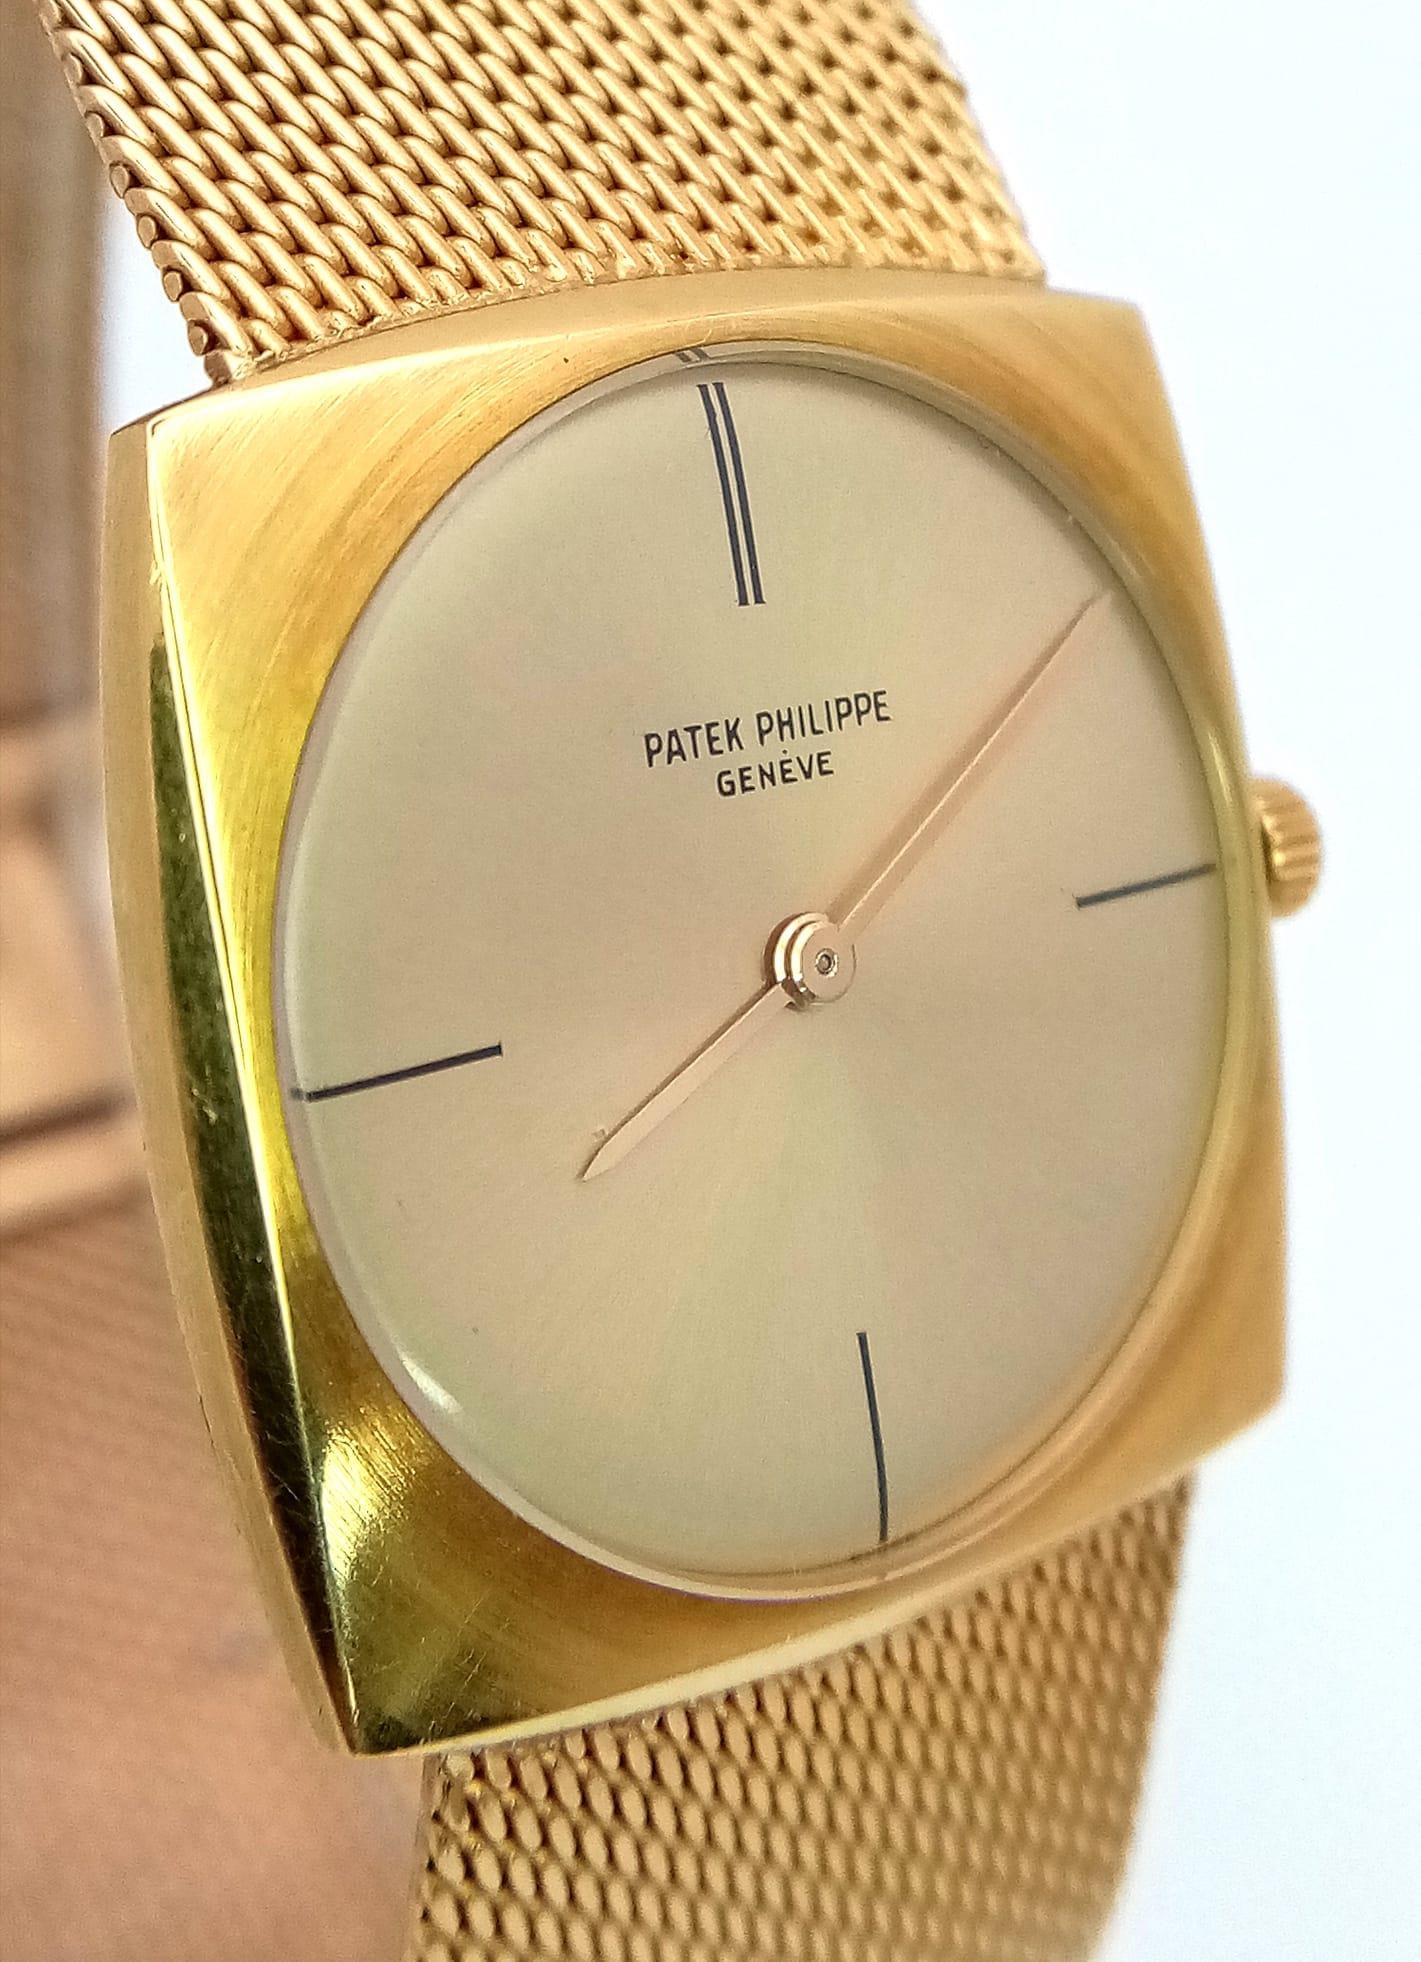 A Classic Vintage Patek Philippe 18K Gold Ladies Watch. 18k gold bracelet and square case - 28mm. - Image 3 of 6